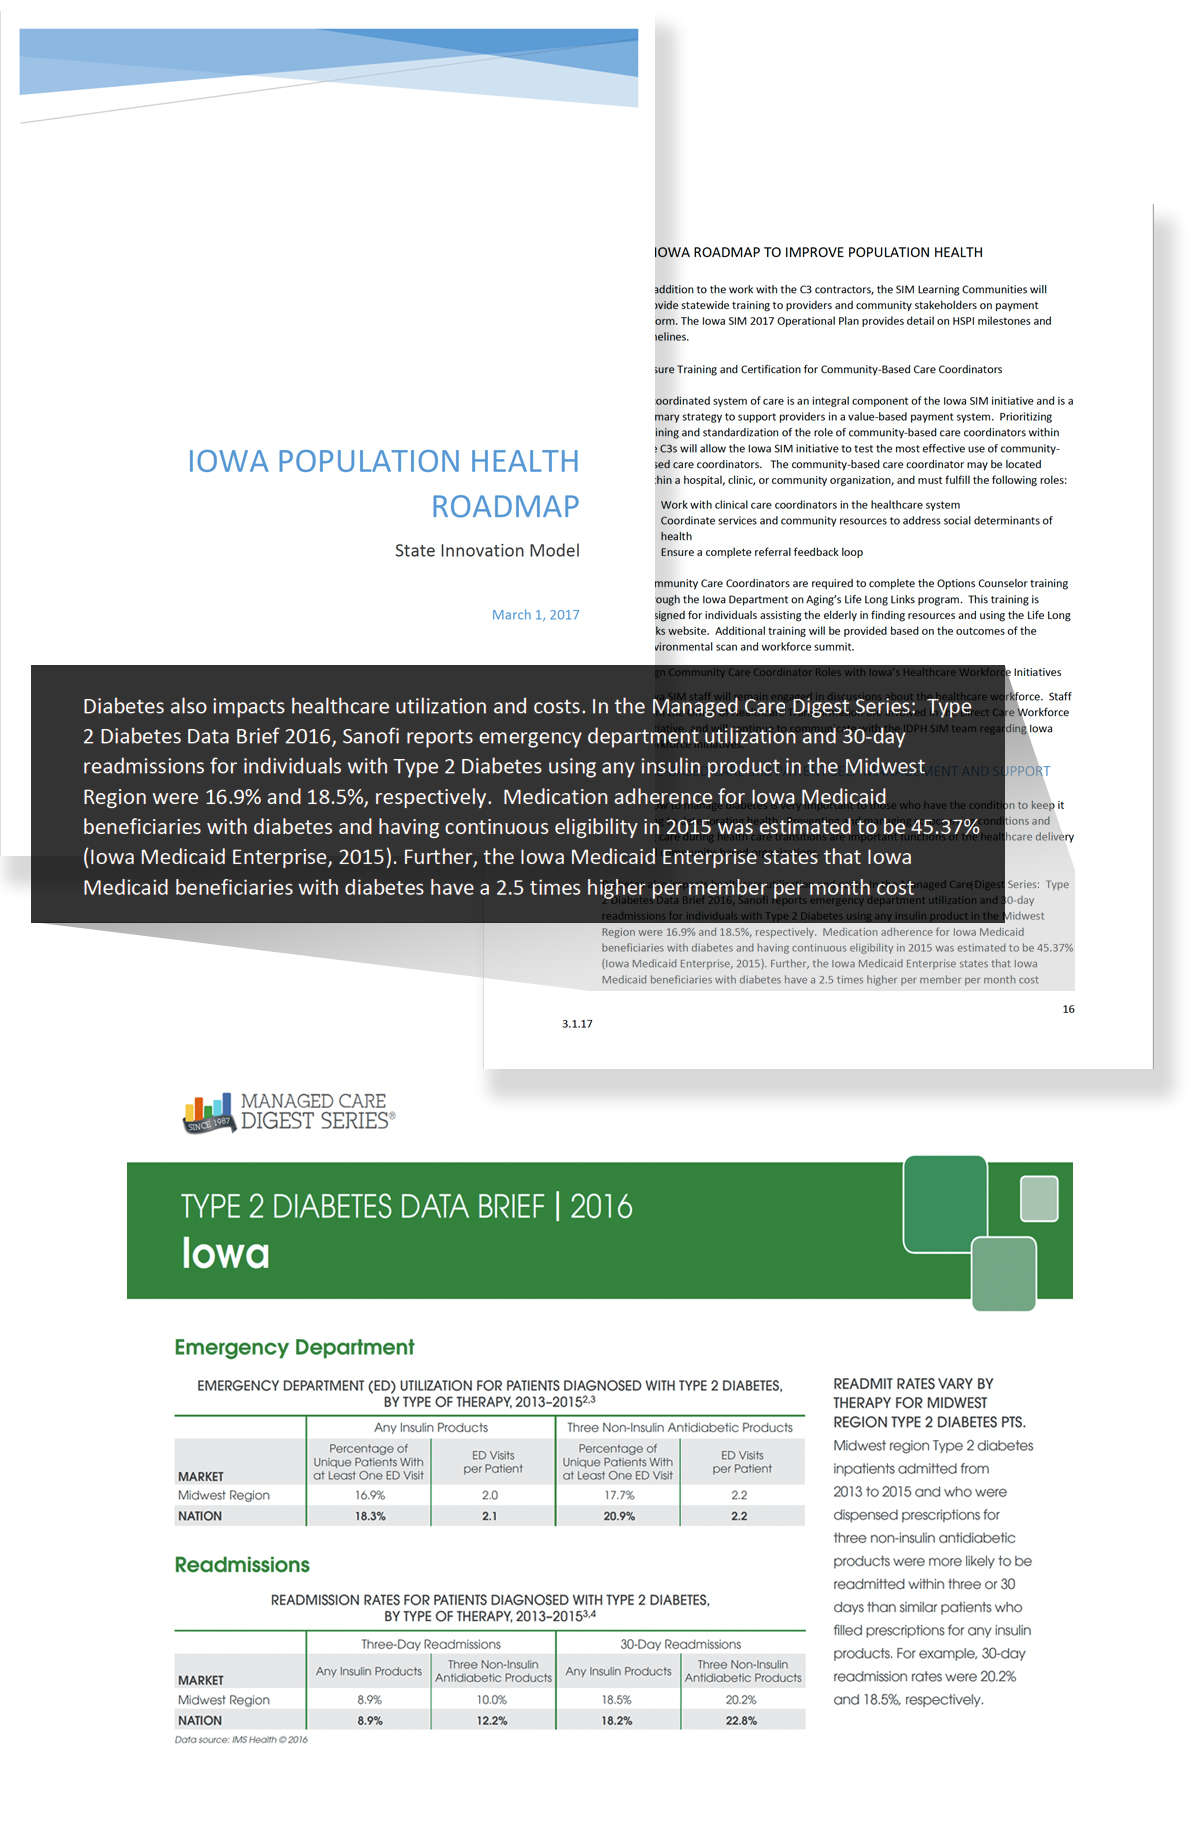 Iowa State Gov't Uses Managed Care Digest Series Data to Help Address Chronic Disease